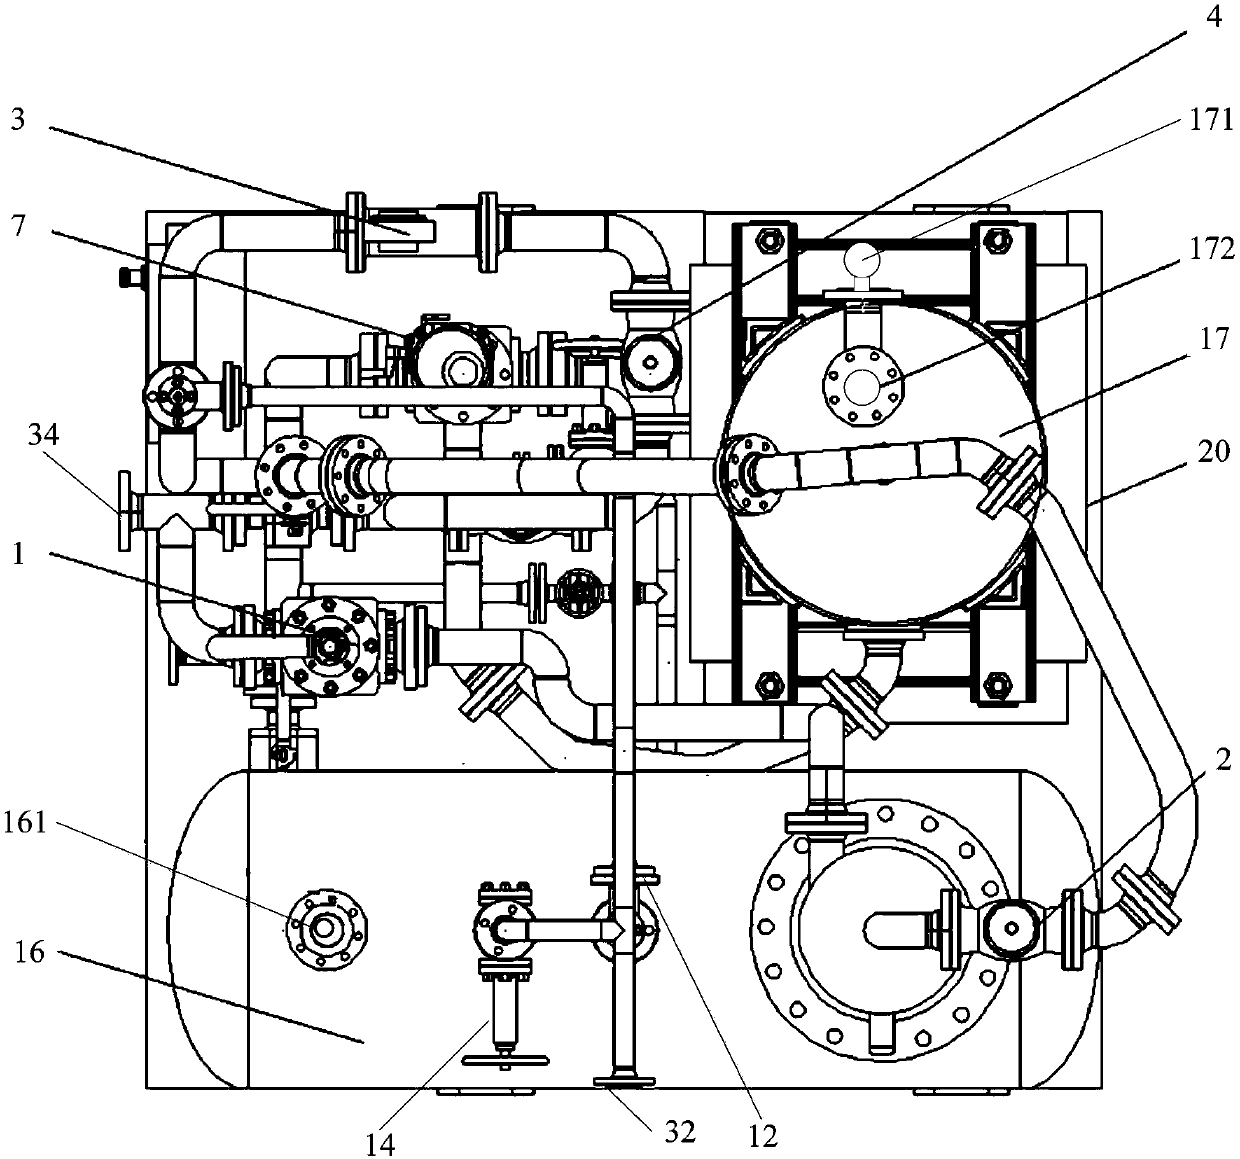 Metering integration device for oil well